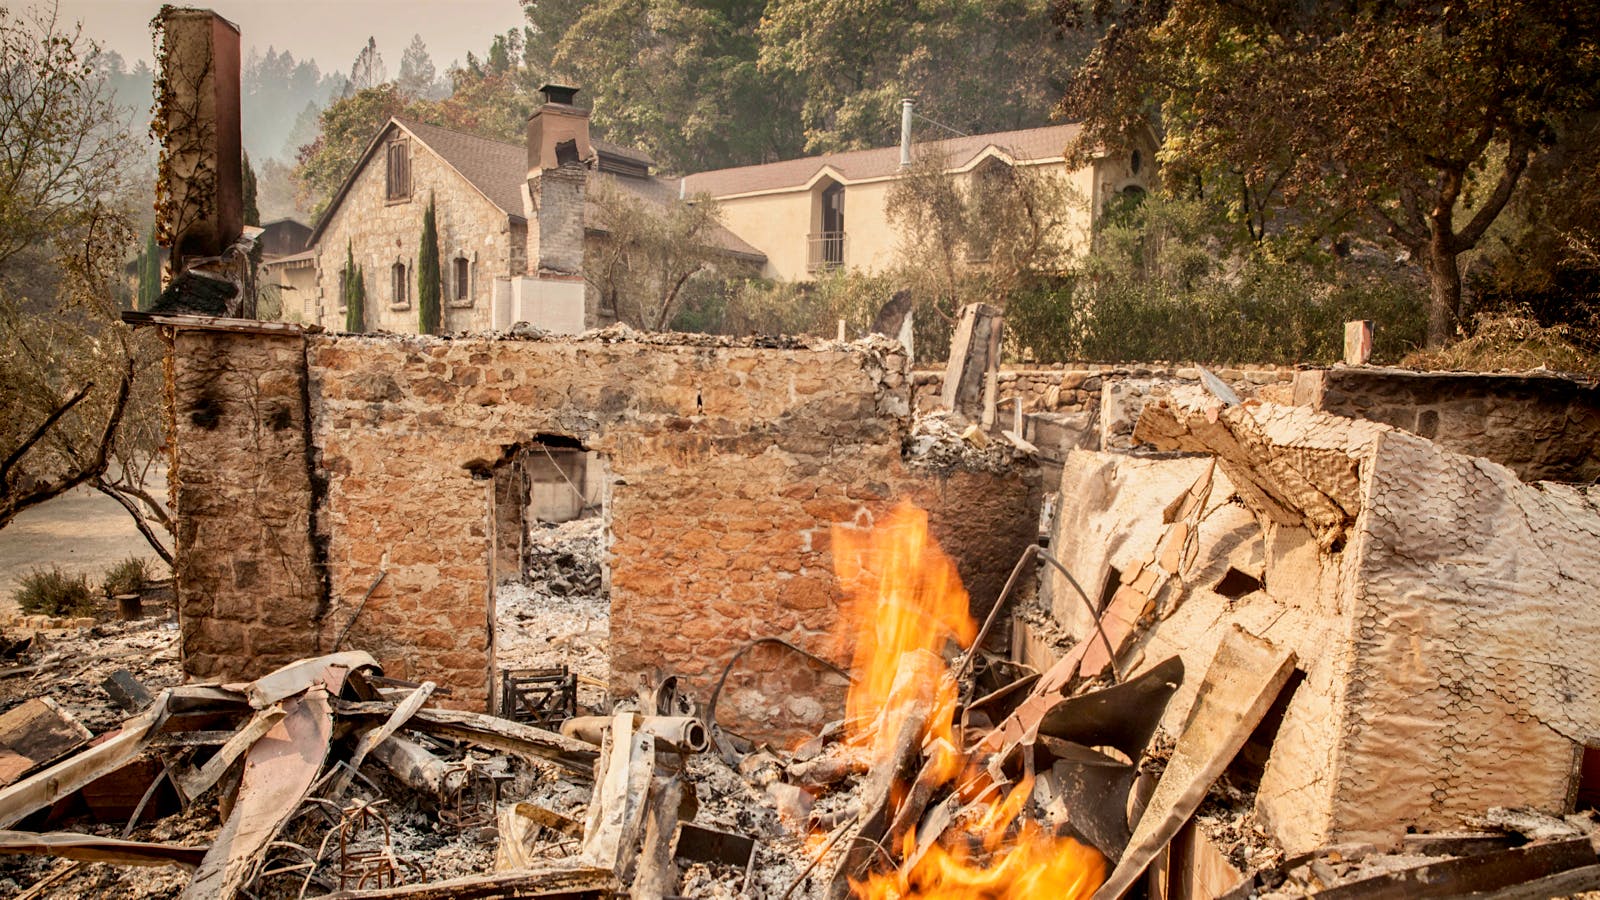 Updated Oct. 13, 11:00 a.m. PST: Massive California Wine-Country Fires Worsen, Sending More Residents Fleeing